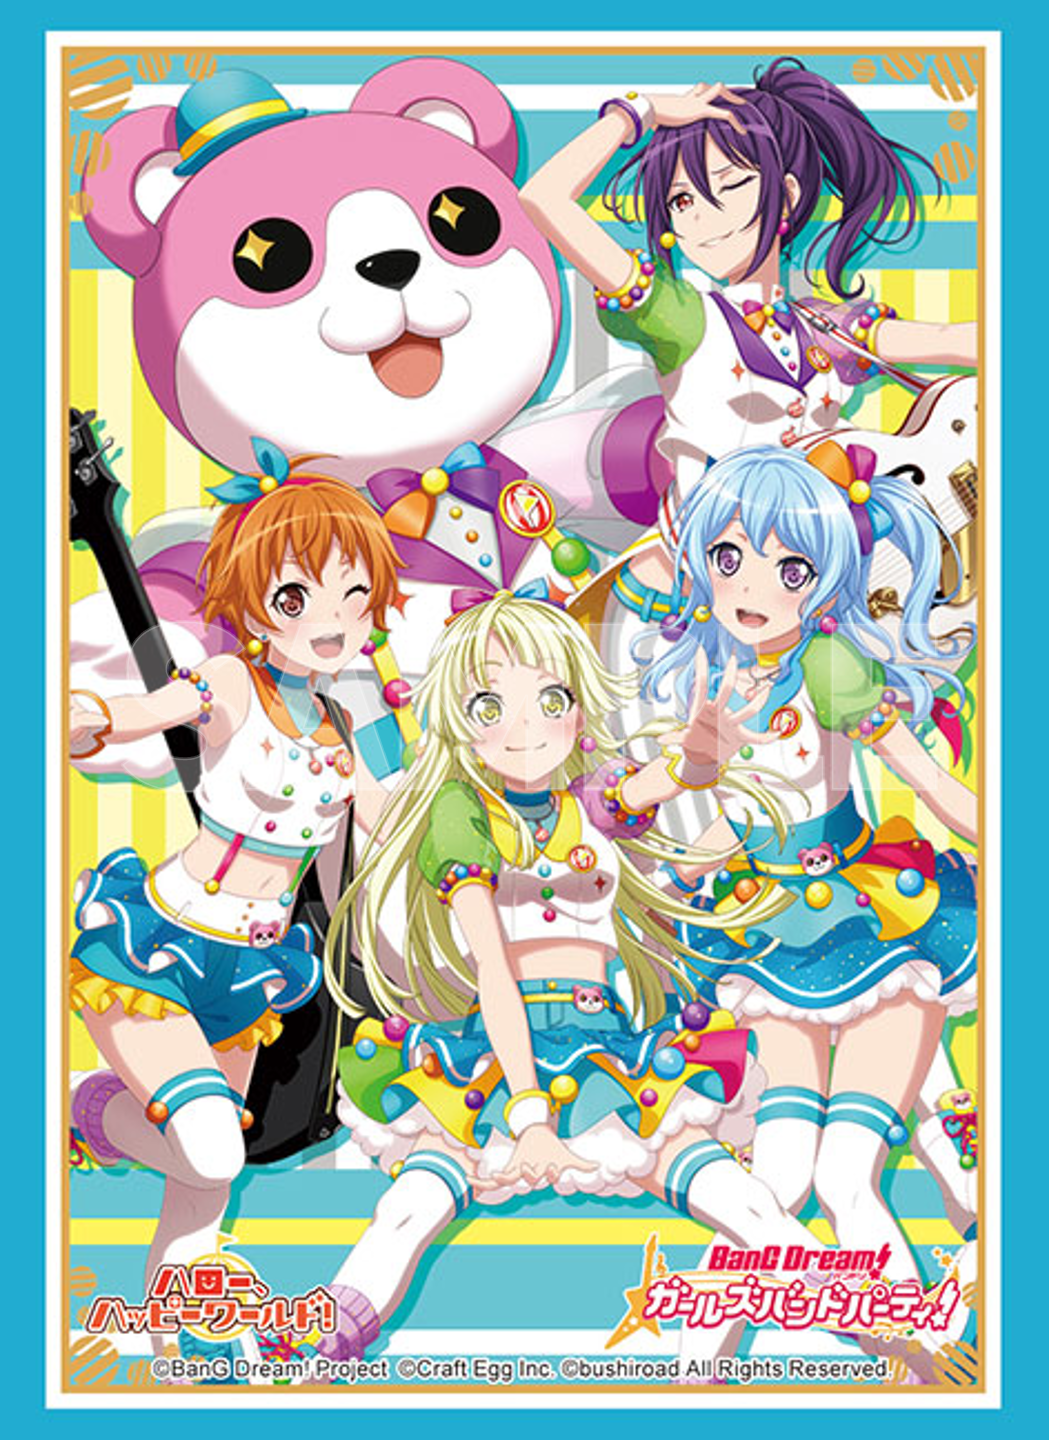 Scout for Cool Type Members - BanG Dream Girls Band Party